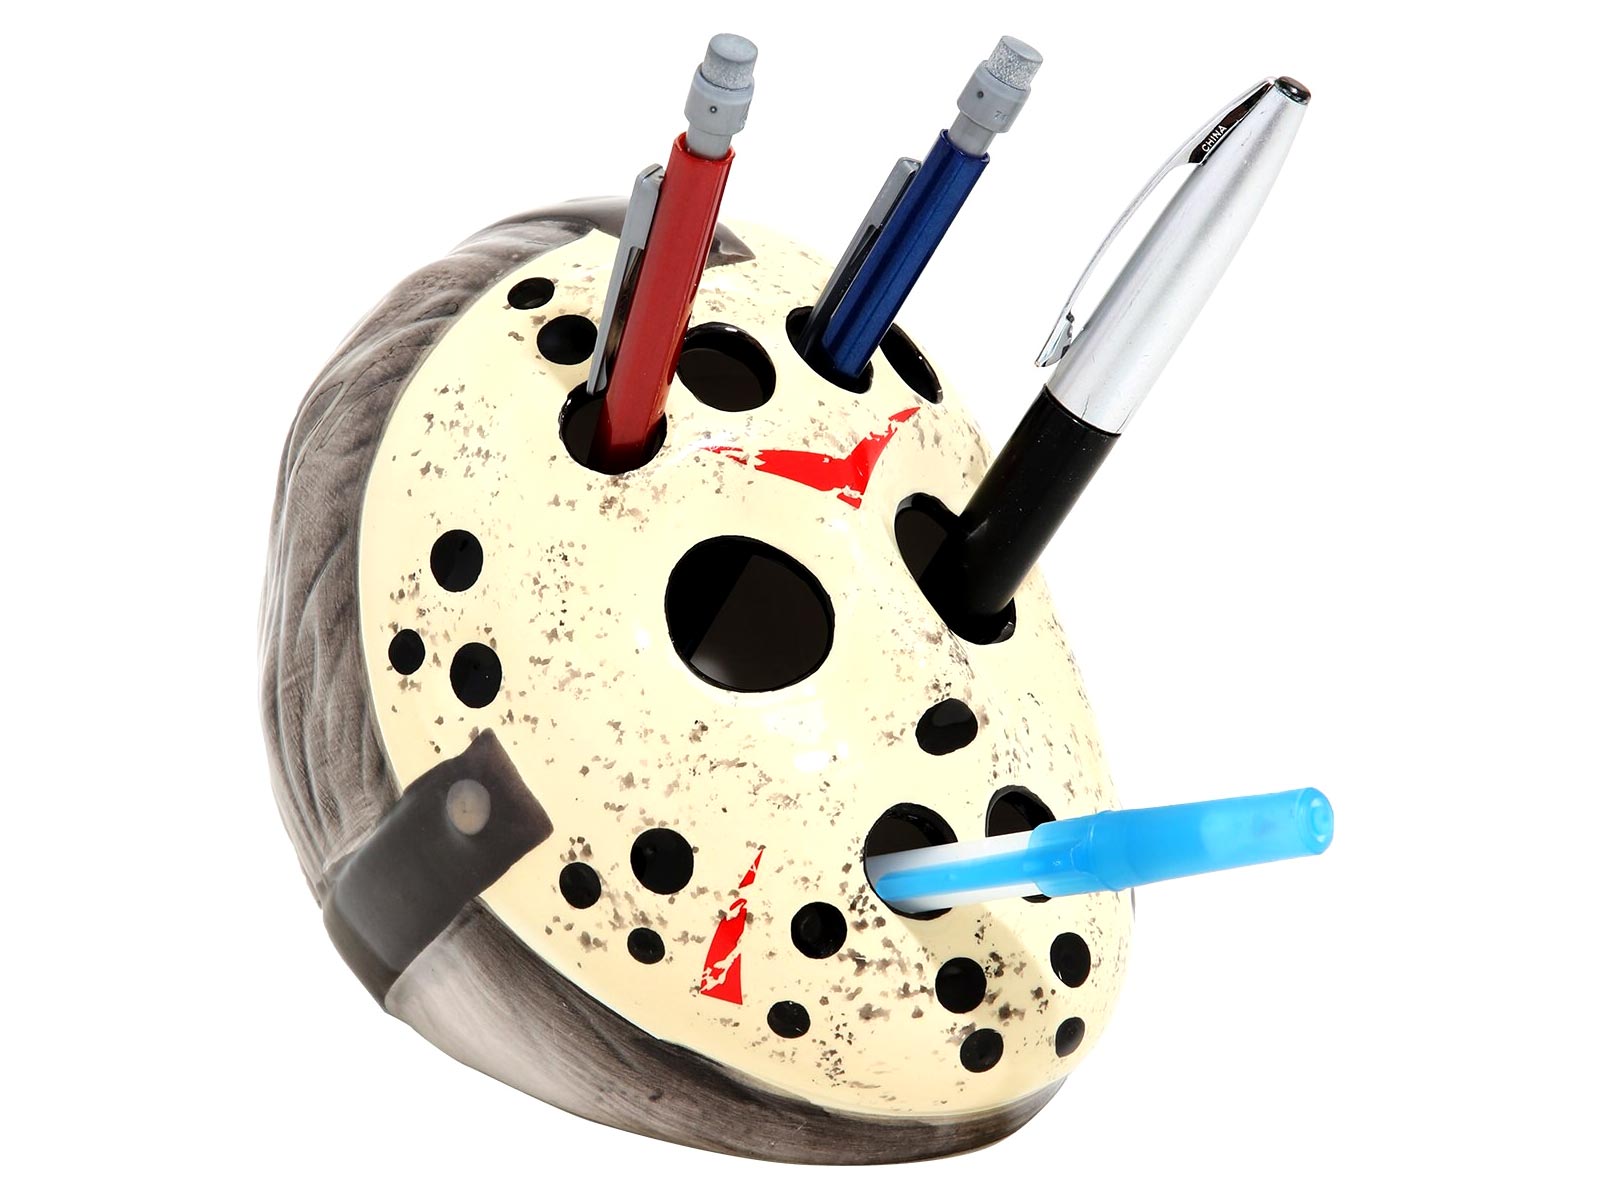 Friday The 13th Jason Mask Pen Holder - Friday The 13th Nes Mask - HD Wallpaper 